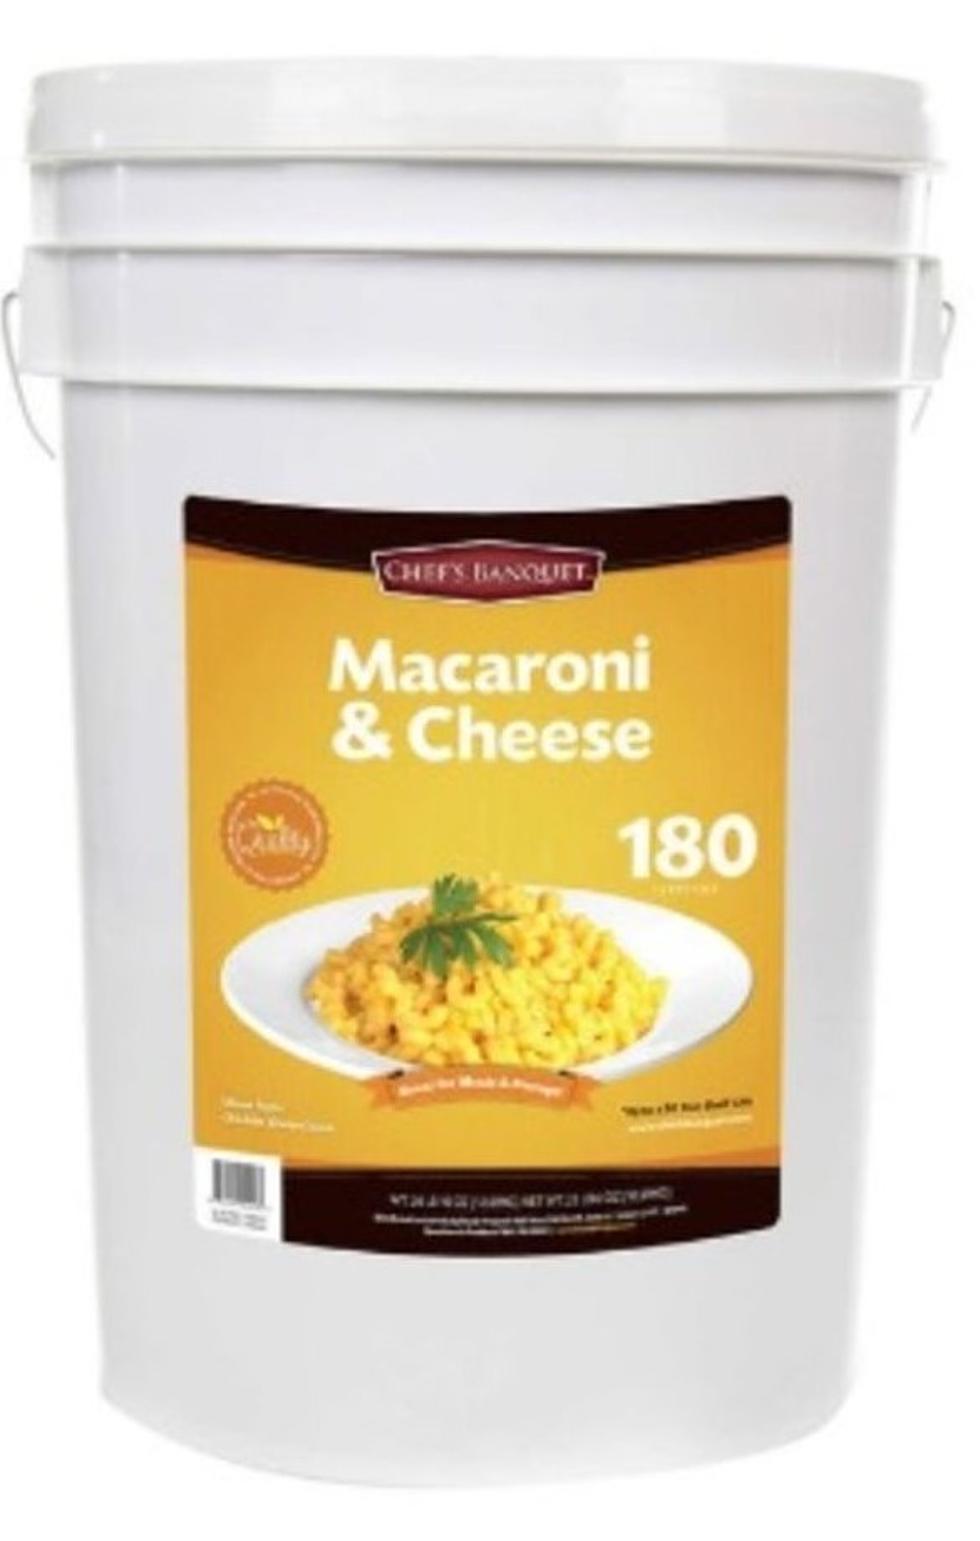 Survive The Apocalypse With A 27 Pound Bucket Of Mac &#038; Cheese